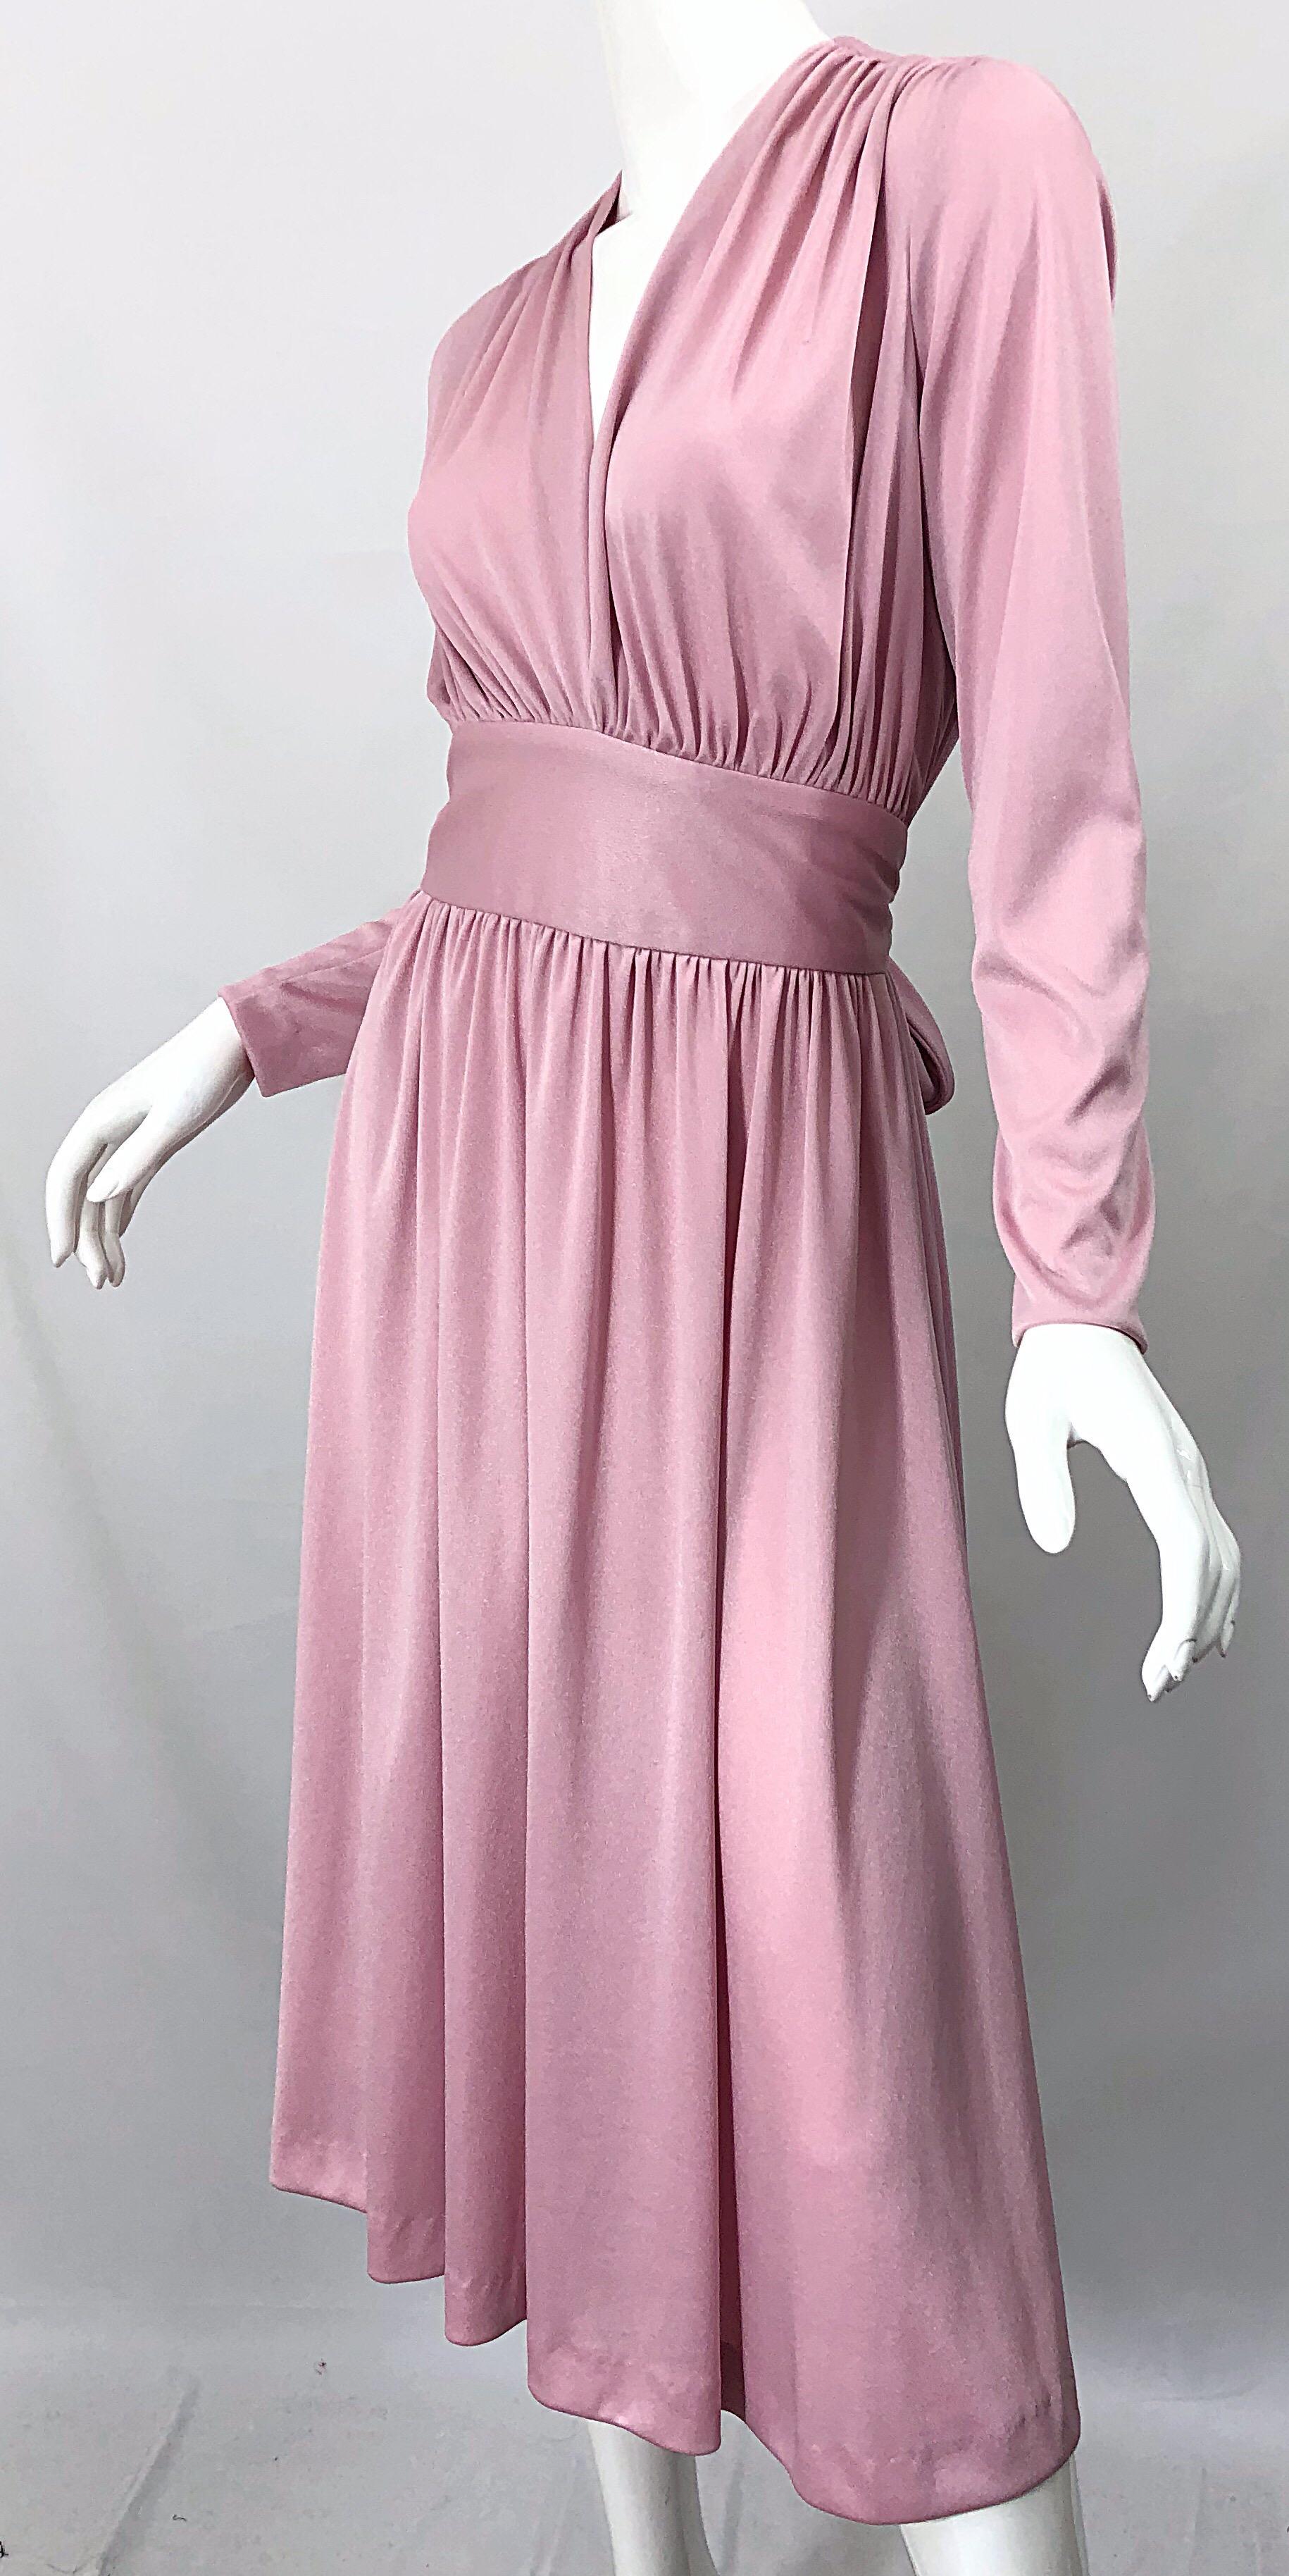 Joy Stevens 1970s Pink Mauve Dusty Rose Long Sleeve Disco Vintage 70s Dress In Excellent Condition For Sale In San Diego, CA